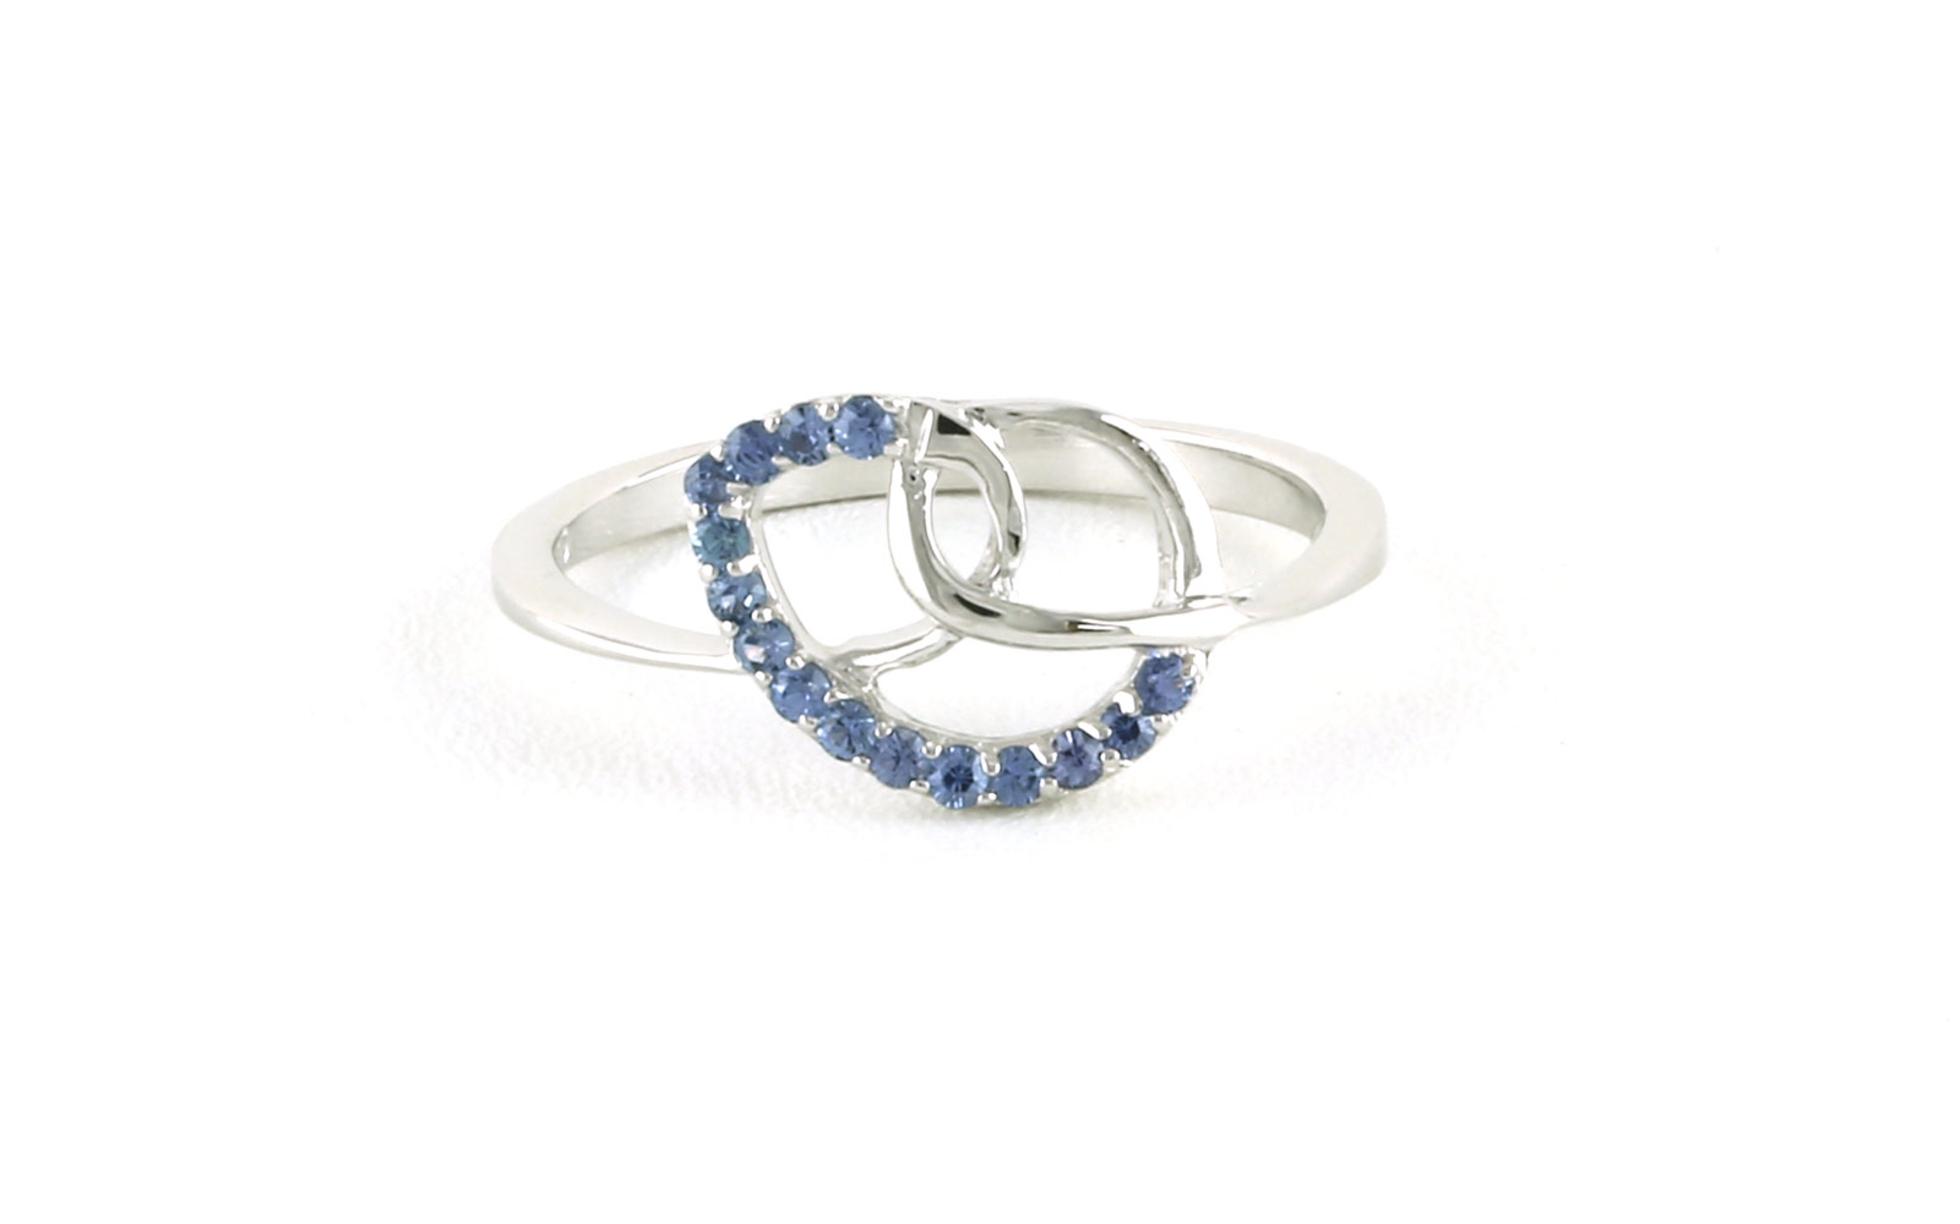 Pretzel Knot Pave Montana Yogo Sapphire Ring in Sterling Silver